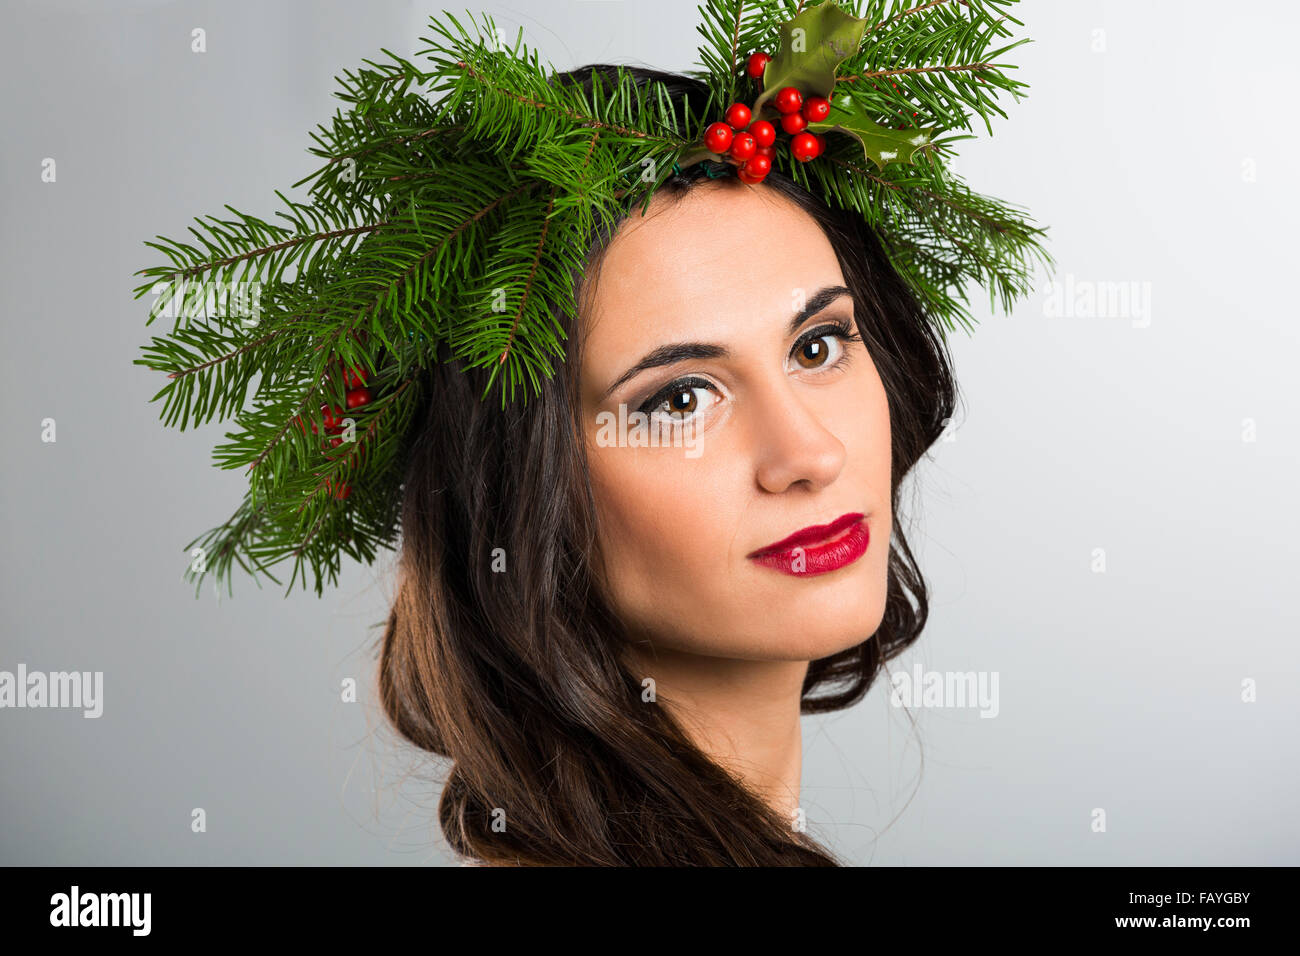 Portrait of a beautiful woman with Cristmas decorations on the head Stock Photo